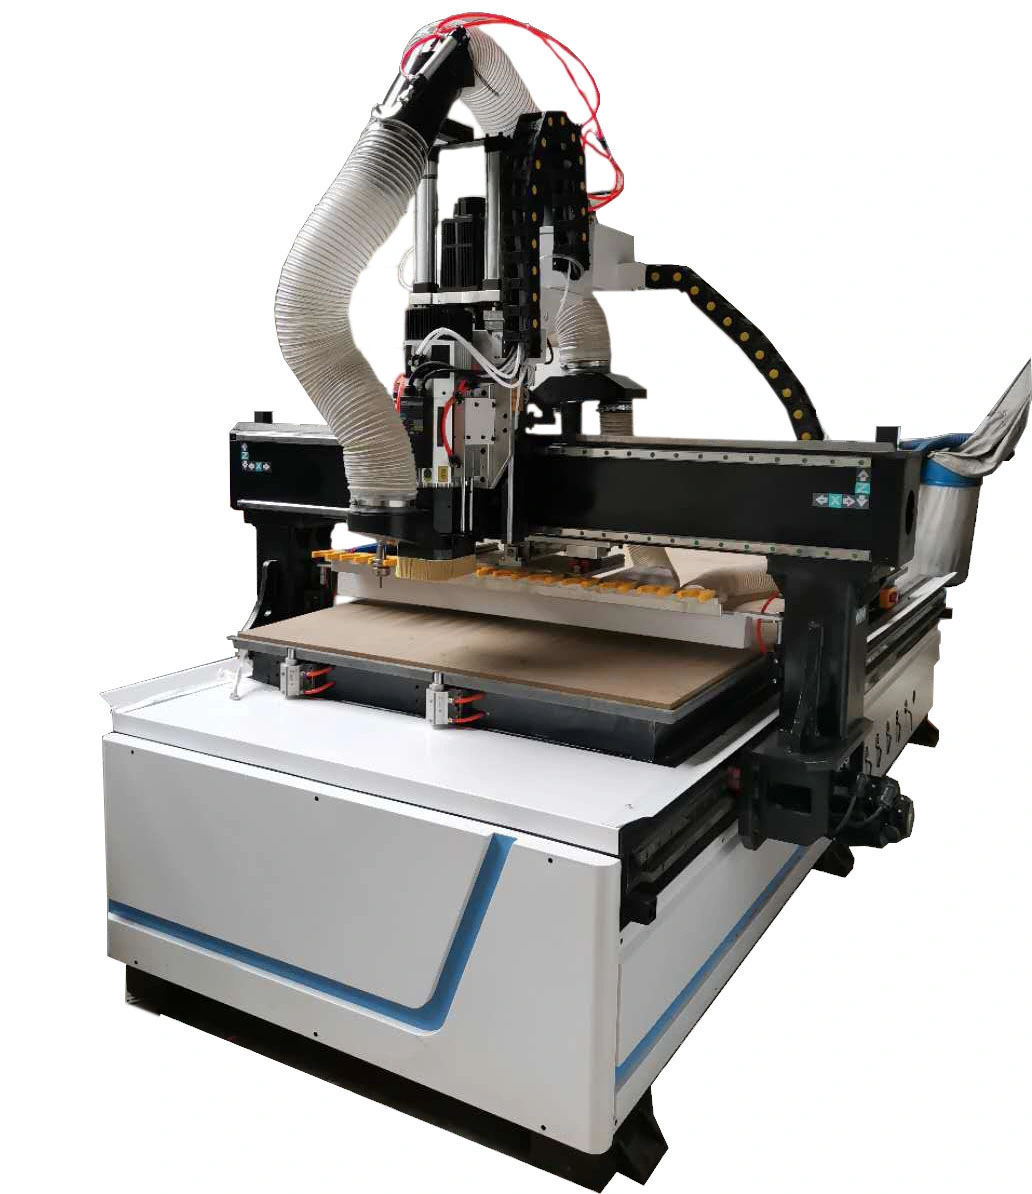 3D Sculpture Machine for Wood, Atc CNC Router Machine with Good Price in India